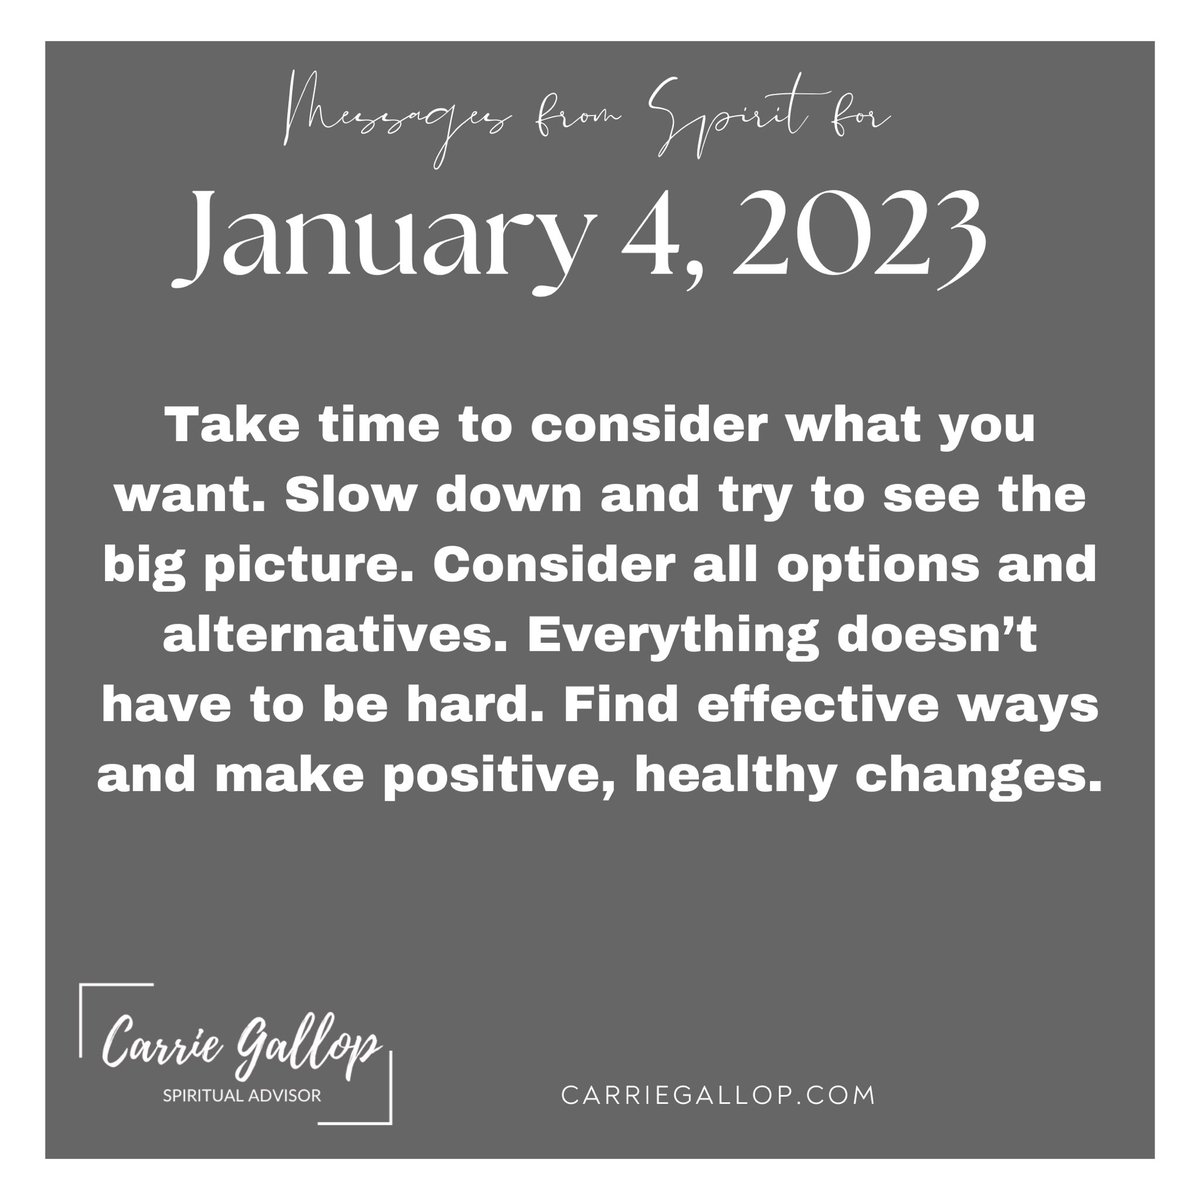 Messages From Spirit for January 4, 2023 ✨

#Daily #Guidance #Message #MessagesFromSpirit #January4 #Jan4 #TakeTime #Consider #WhatDoYouWant #SlowDown #SeeTheBigPicture #ConsiderOptions #Alternatives #MakeLifeEasier #FindEffectiveWays #Positive #Healthy #Changes